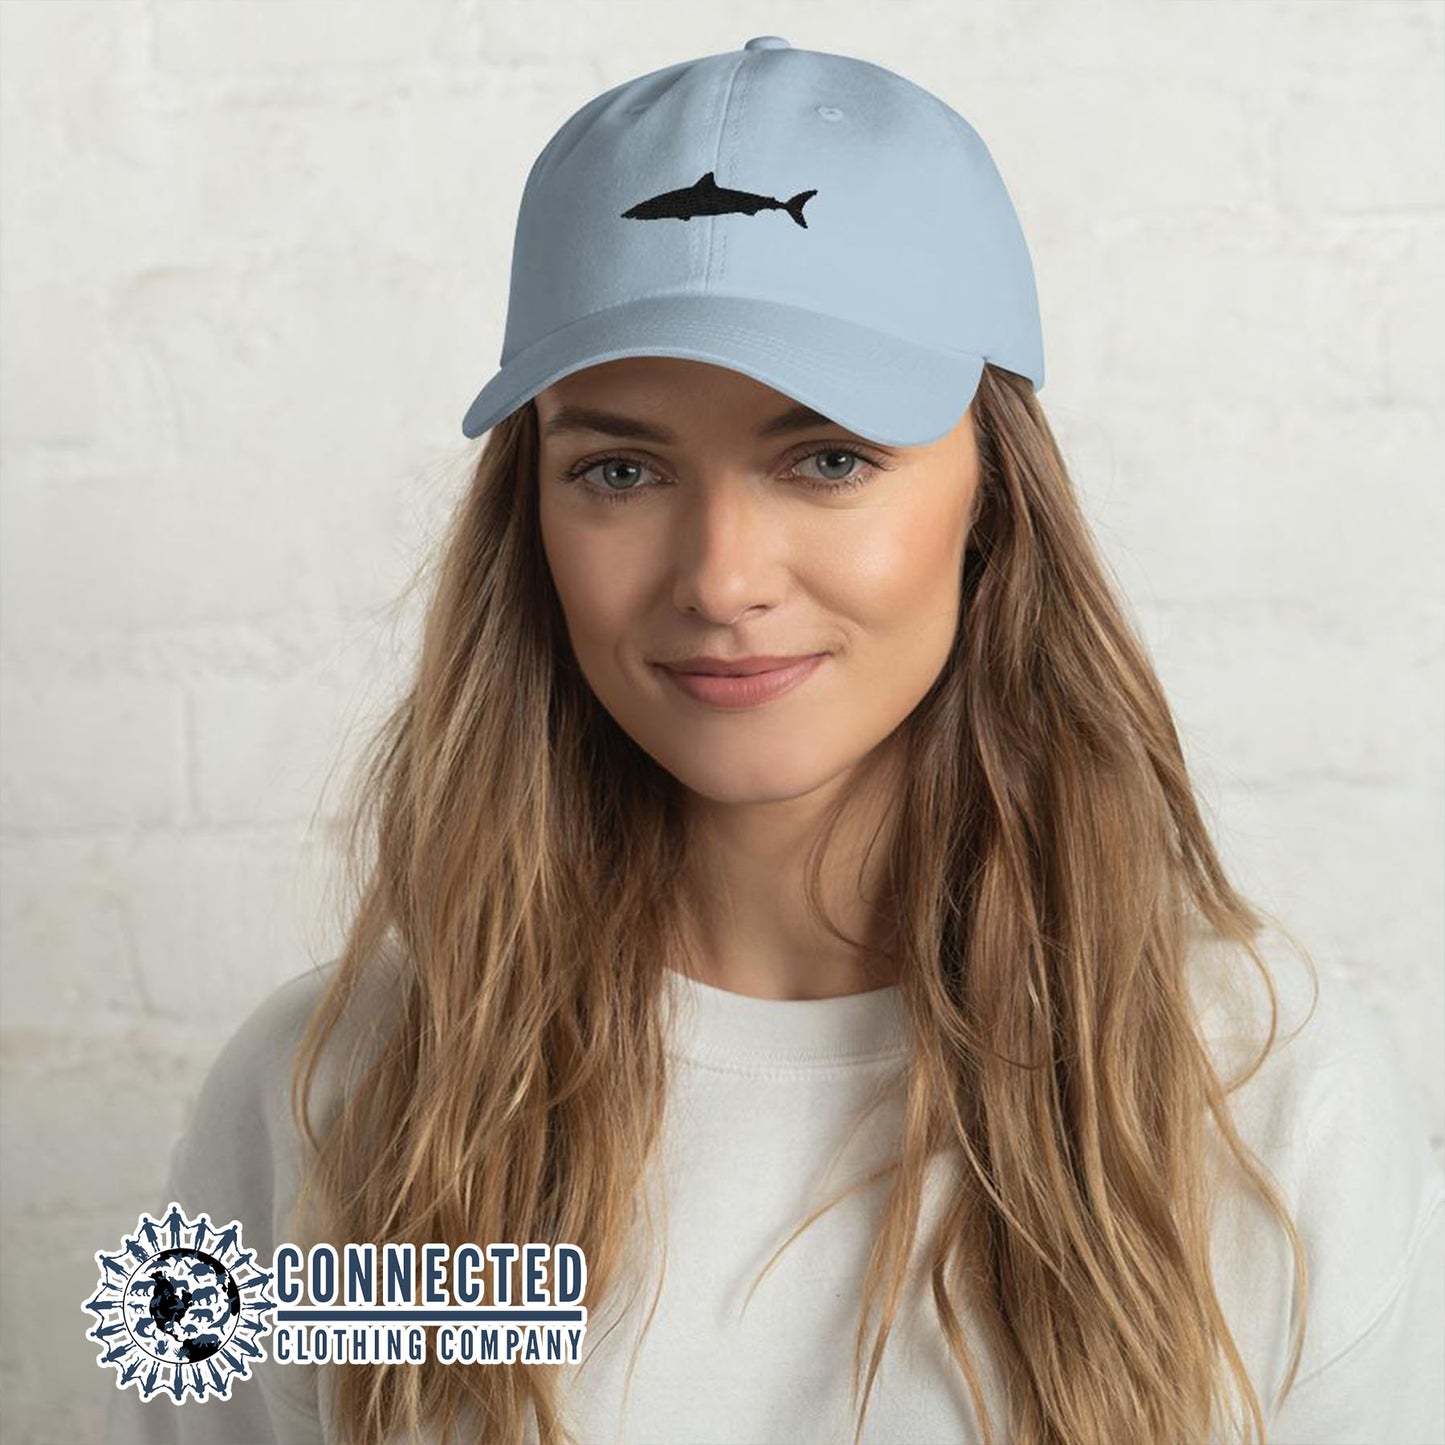 Model Wearing Blue Shark Cotton Cap - architectconstructor - Ethical & Sustainable Clothing That Gives Back - 10% donated to Oceana shark conservation